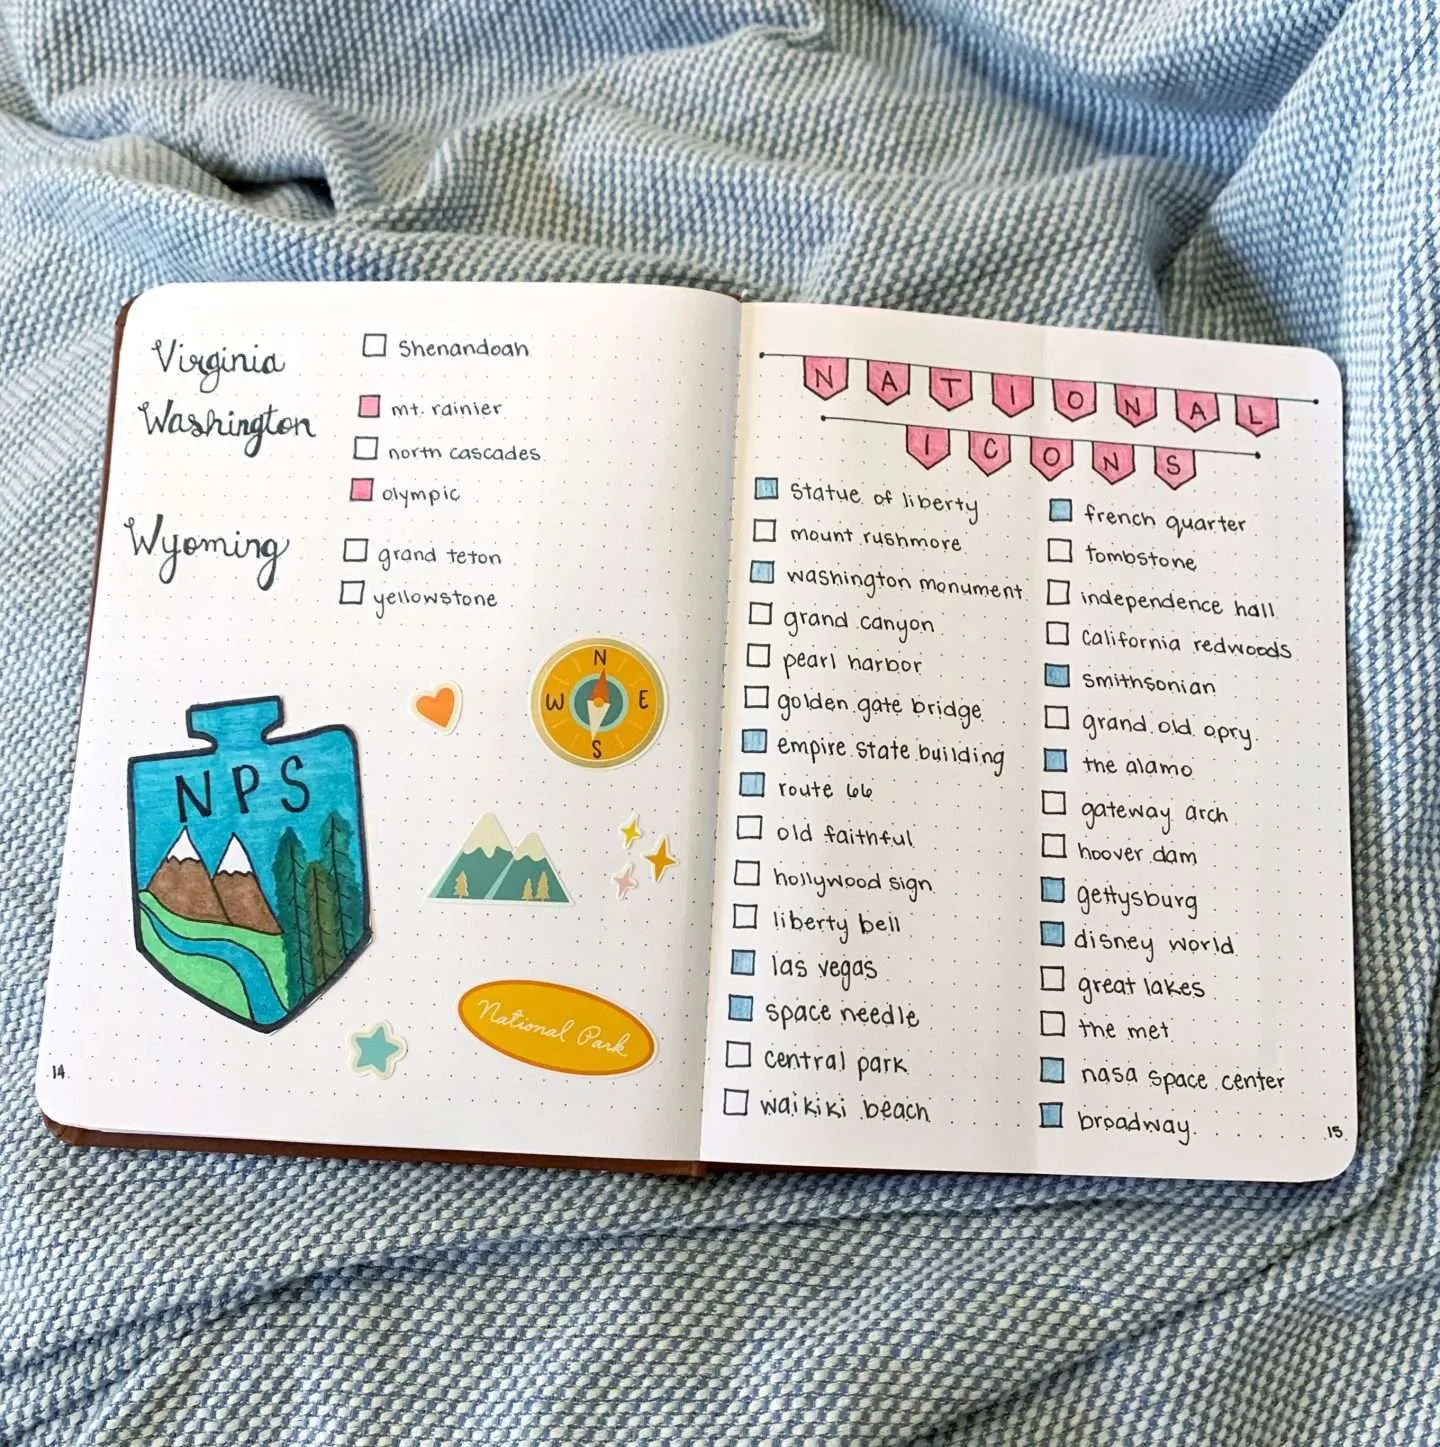 List of National Parks and National Icons in my travel bullet journal.